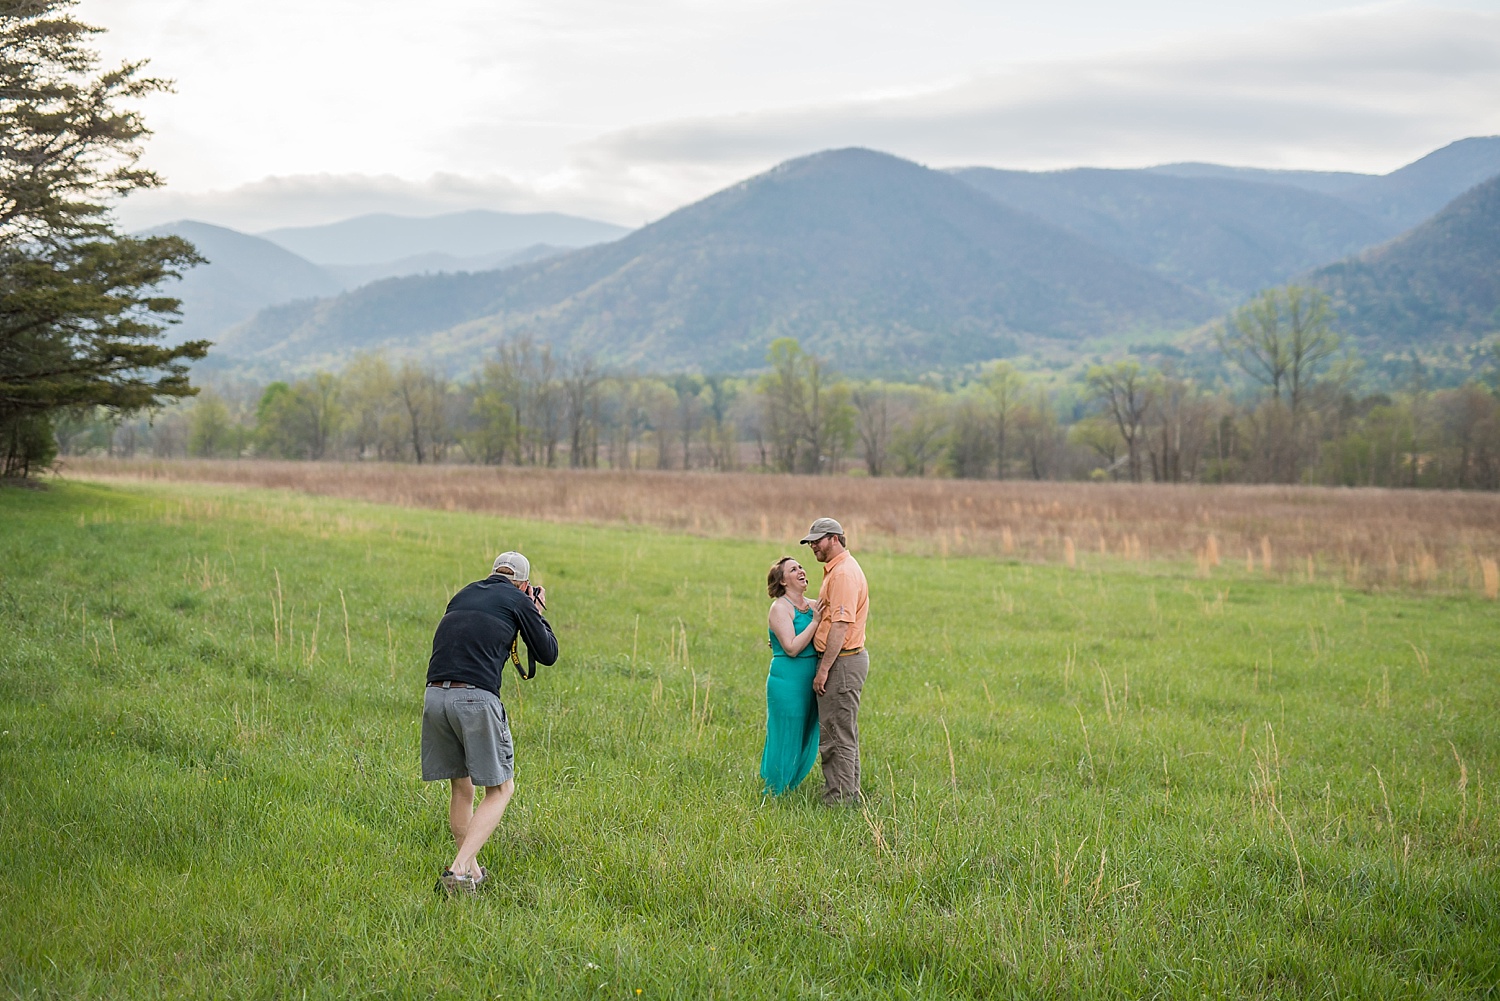  Photographing our dear friend's pregnancy announcement photos in Cade's Cove was definitely a highlight of the year! And it was a photo bucket list item checked off! 